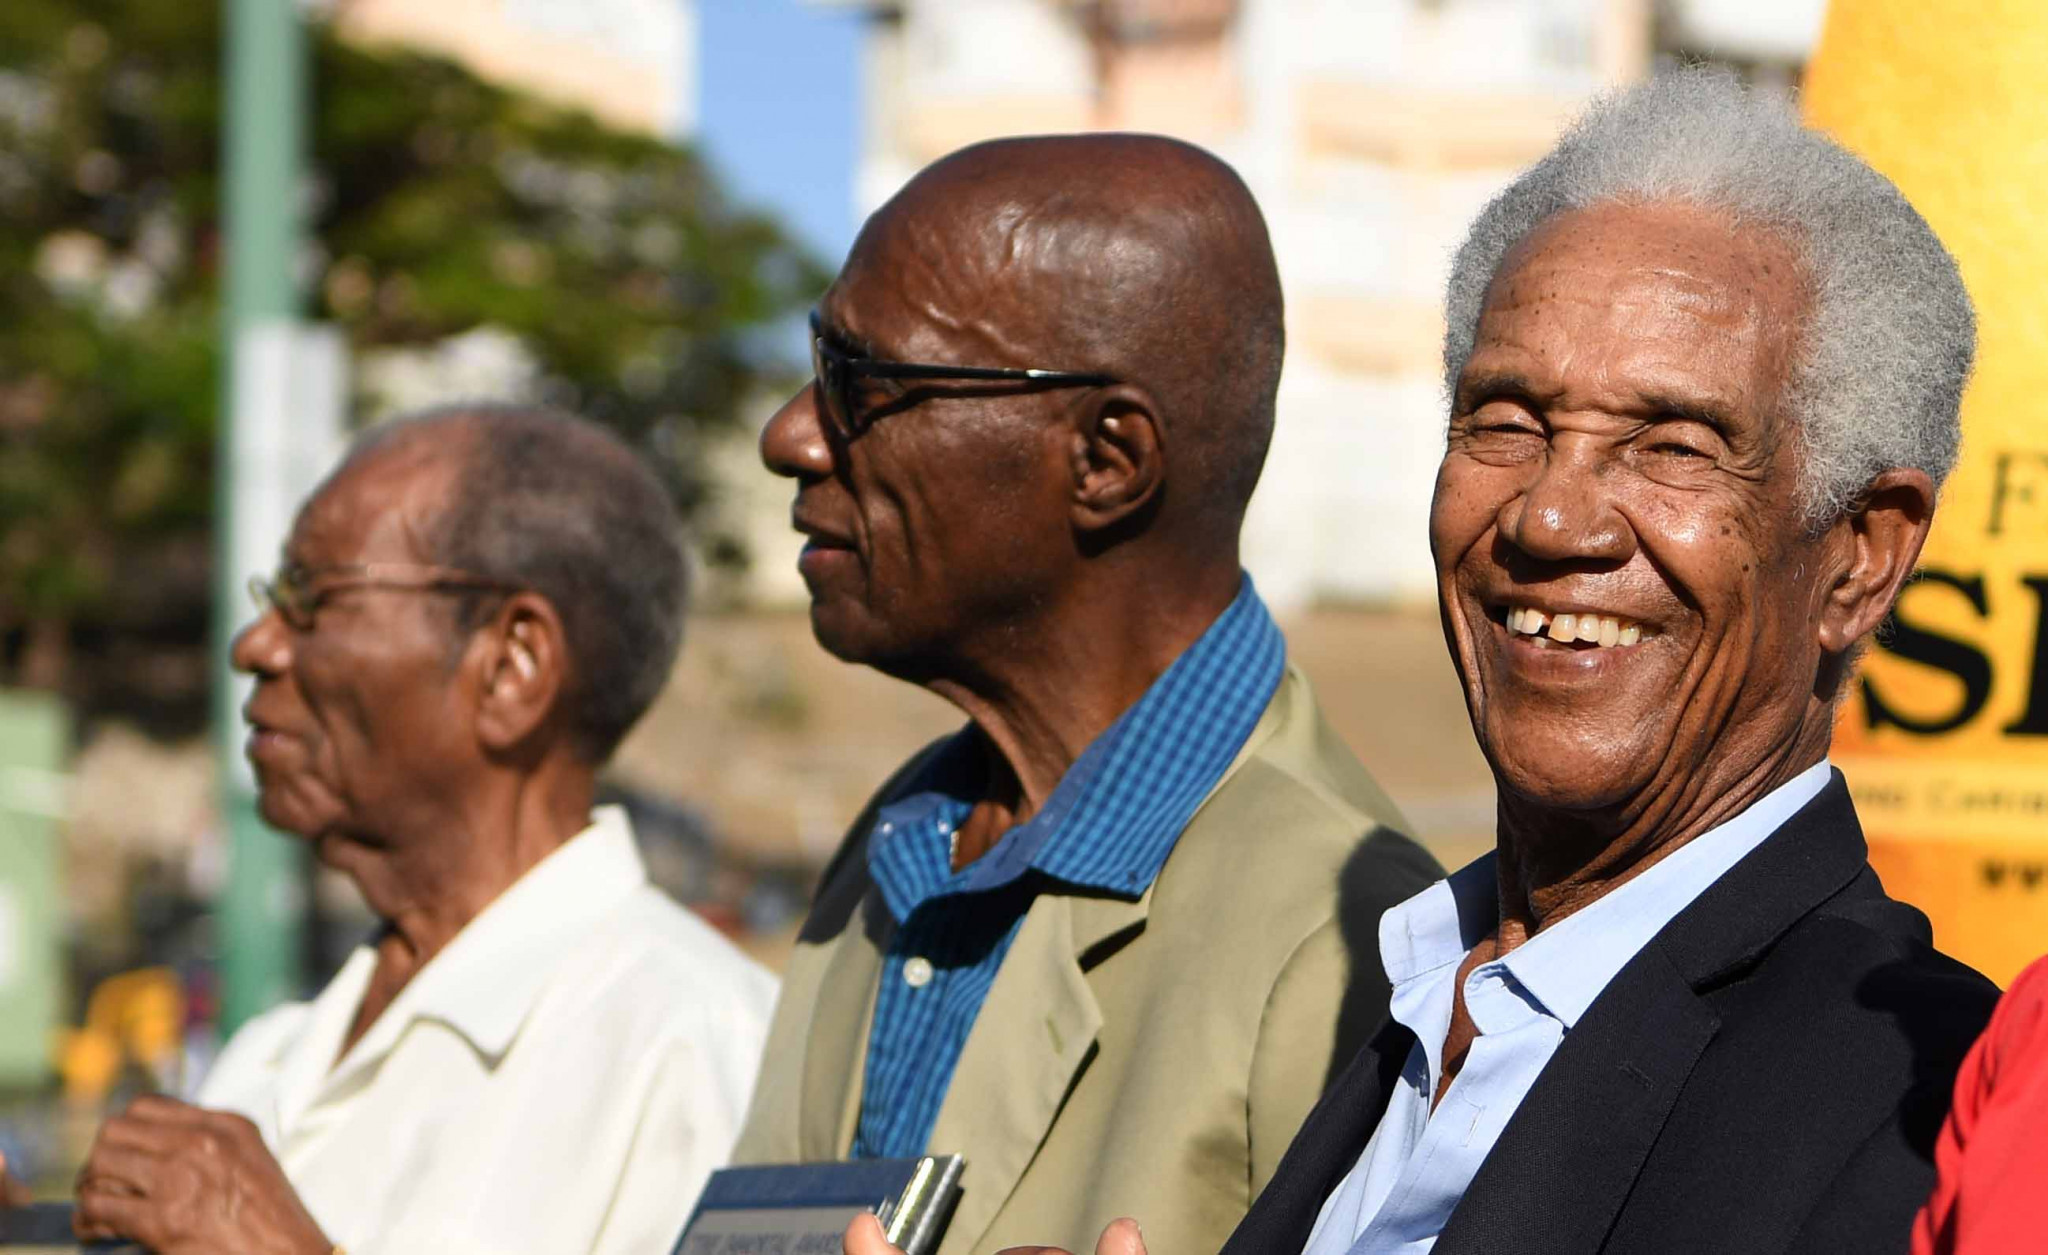 Sir Wes Hall, pictured, centre, with Sir Everton Weekes and Sir Garfield Sobers this year during a one-day tour match between England and The University of West Indies Vice Chancellor's XI in Bridgetown, Barbados. When Hall was Barbados's Sports Minister in 1988 he took a call from Indian PM Rajiv Gandhi which effectively ended Barbados plans to bid for the 1998 Commonwealth Games ©Getty Images